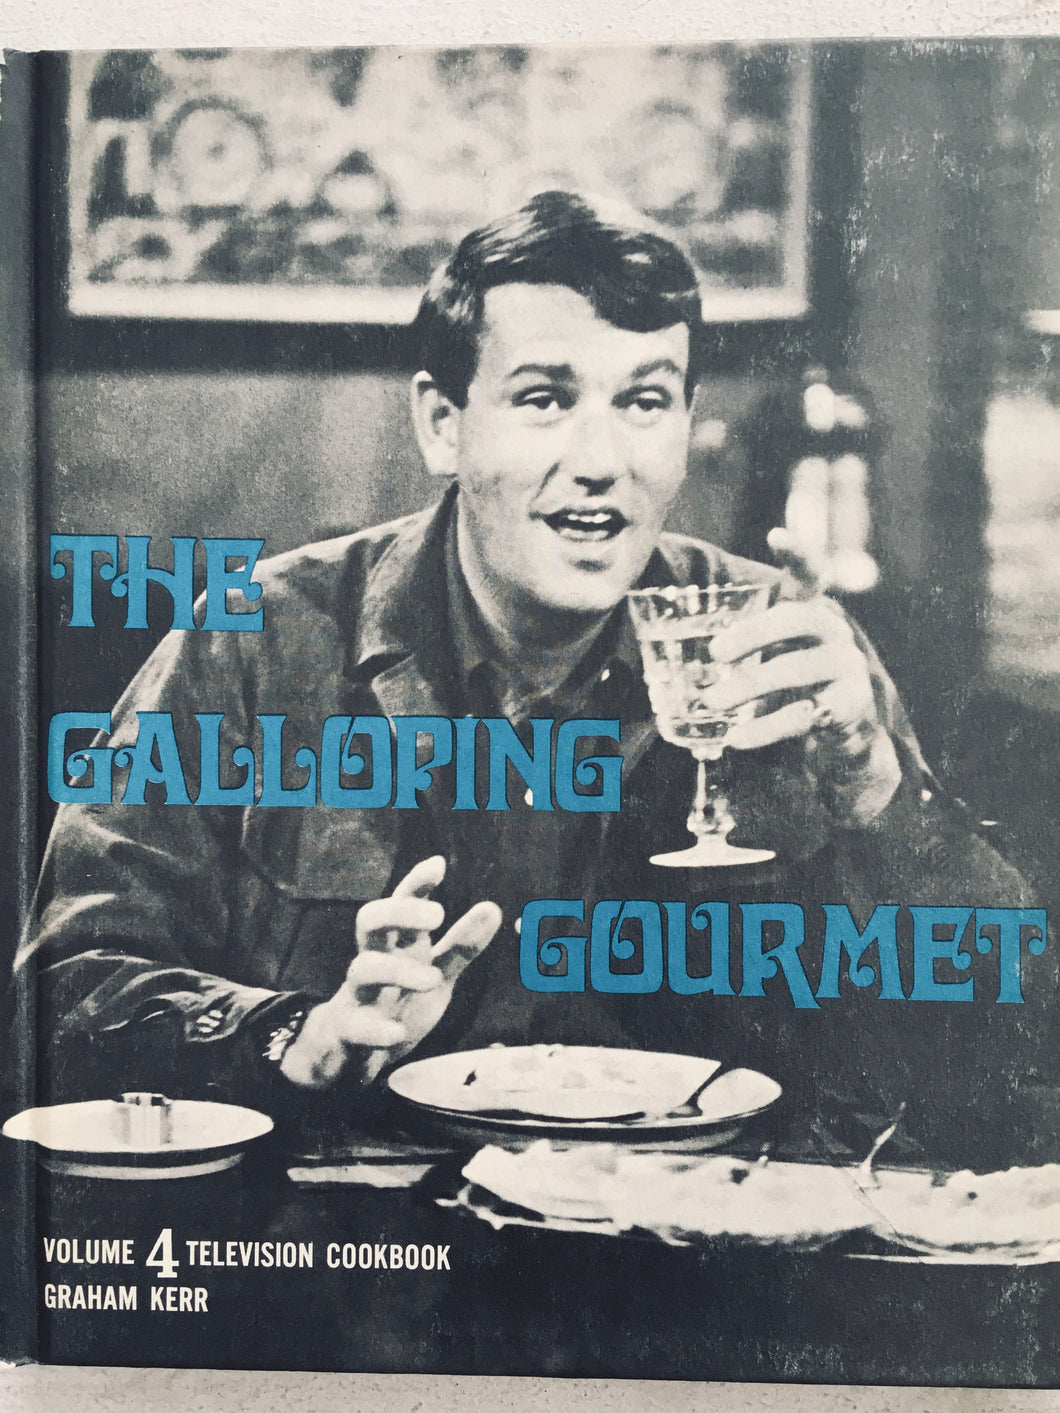 Graham Kerr celebrates the cookbook that led to his gallop